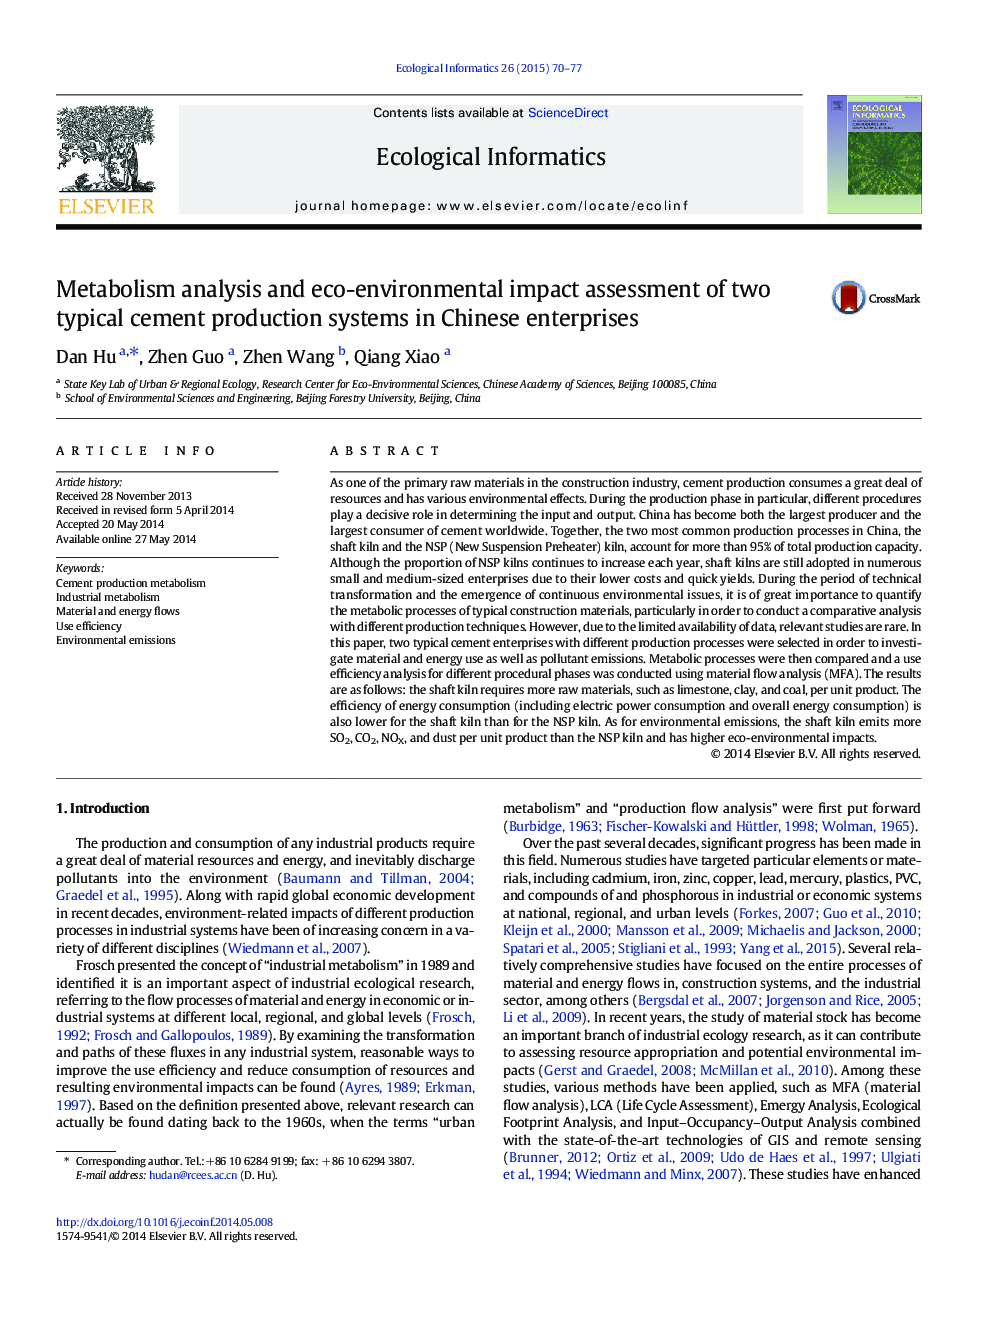 Metabolism analysis and eco-environmental impact assessment of two typical cement production systems in Chinese enterprises